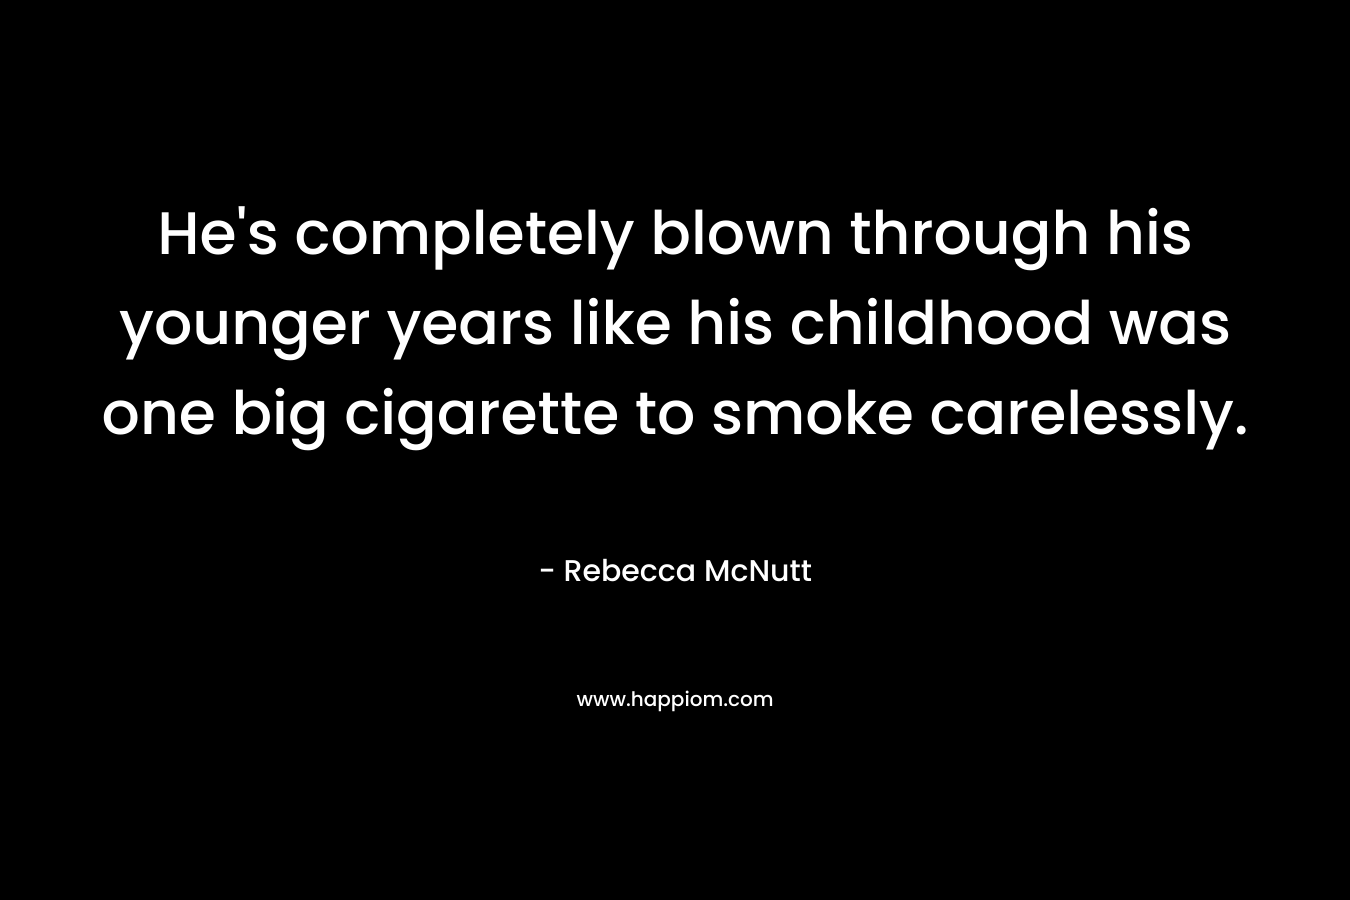 He's completely blown through his younger years like his childhood was one big cigarette to smoke carelessly.